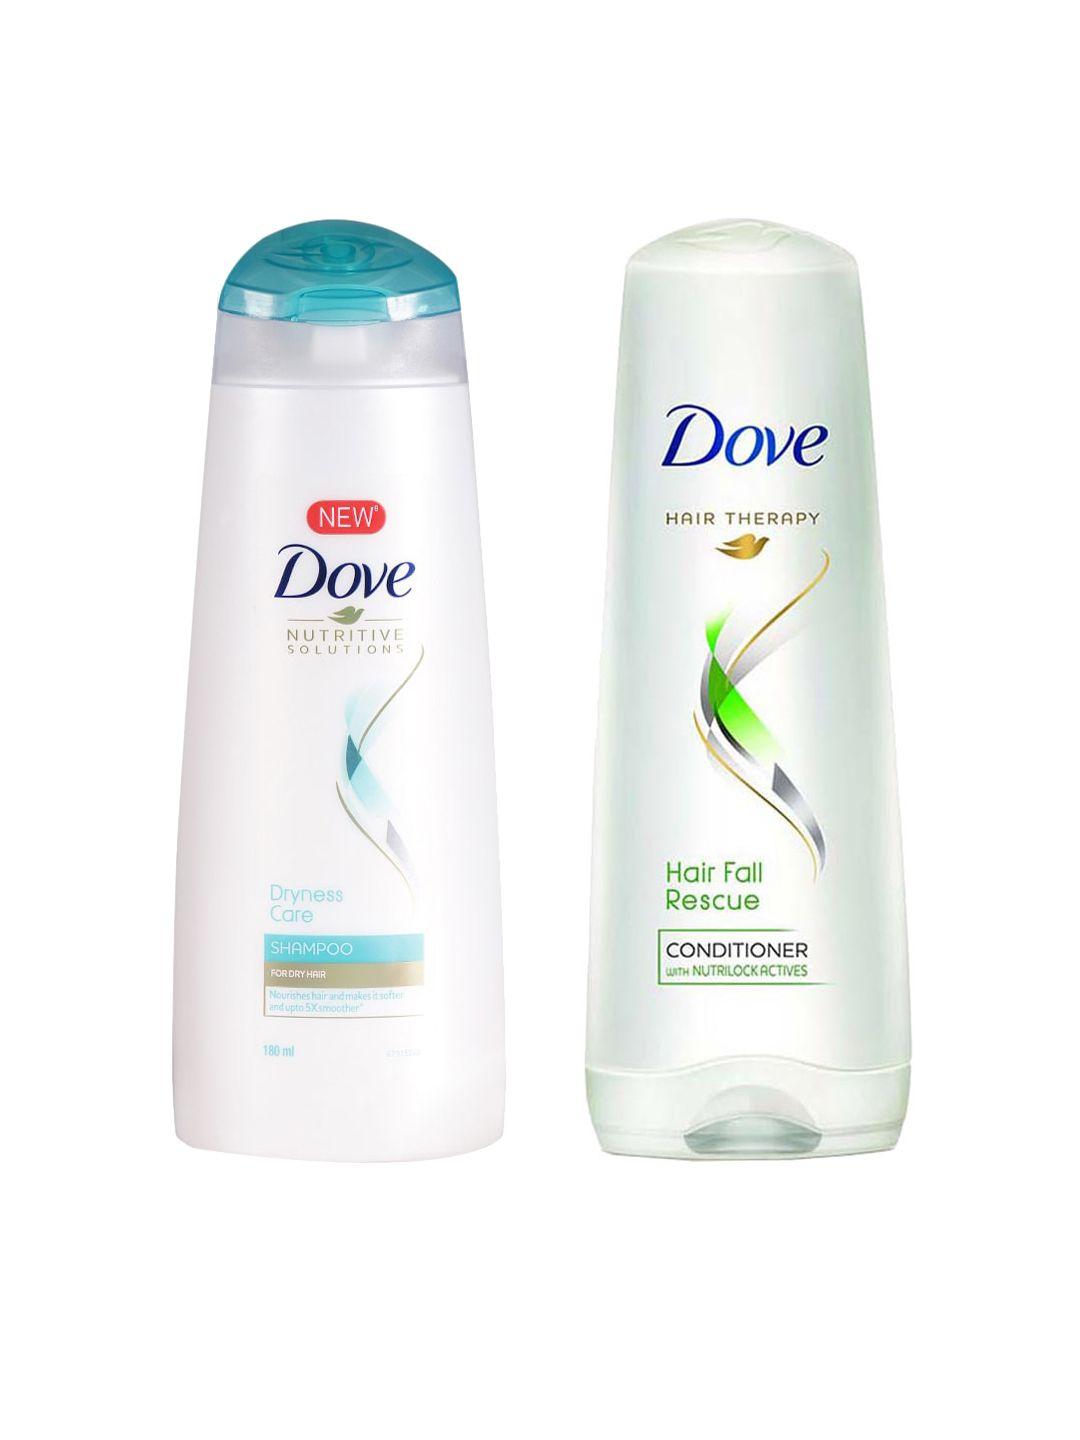 dove hair therapy hair fall rescue conditioner & unisex dryness care shampoo